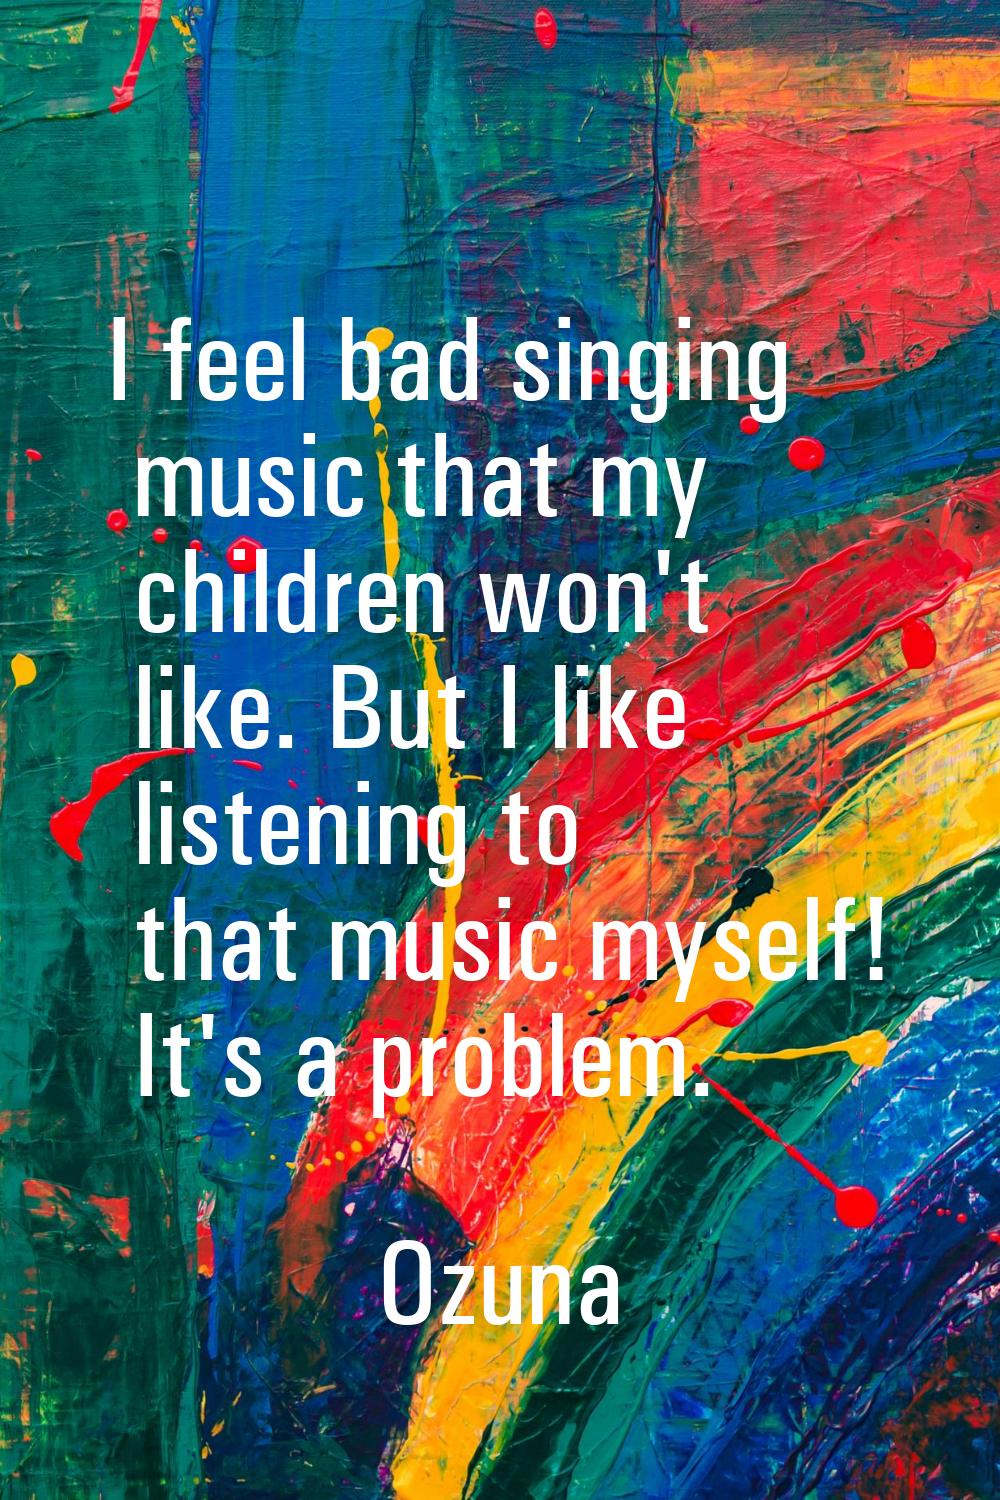 I feel bad singing music that my children won't like. But I like listening to that music myself! It